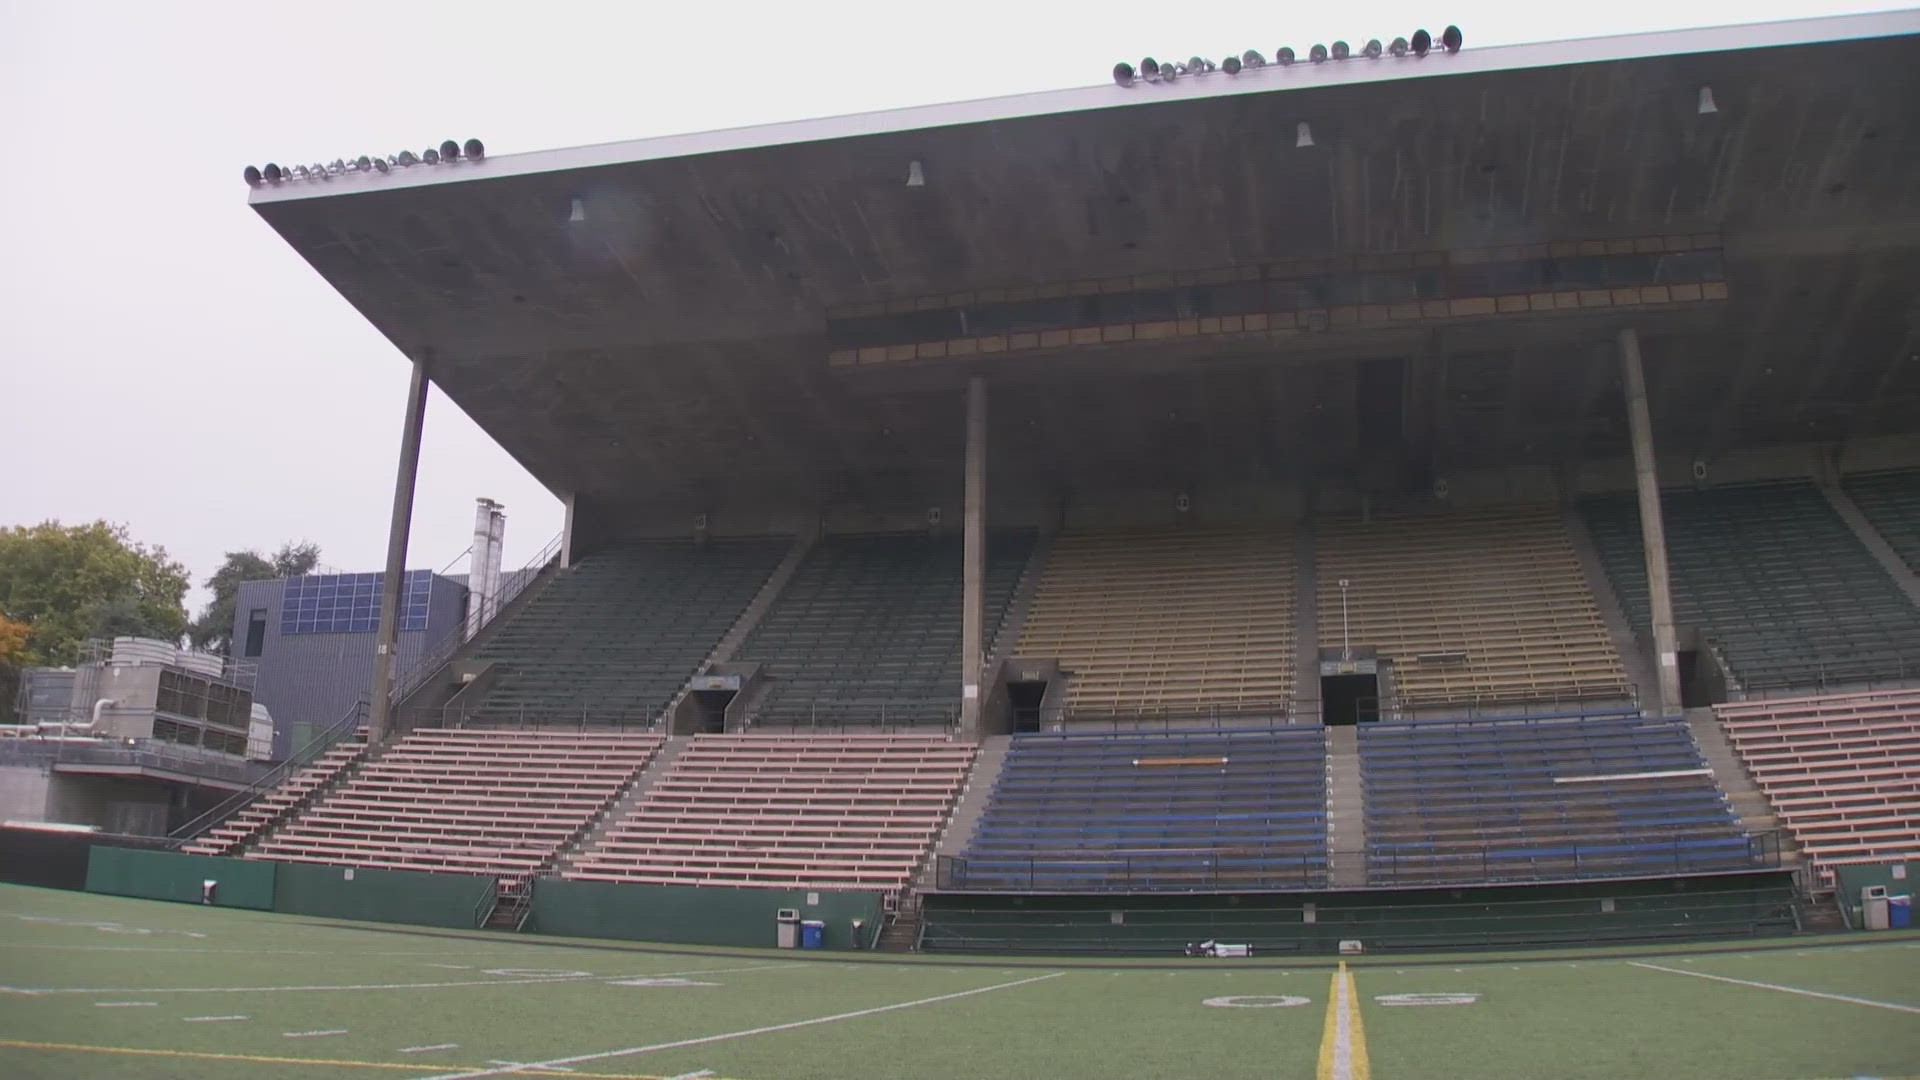 Memorial Stadium is entering its final chapter, with plans to demolish it and build a new stadium in its place.